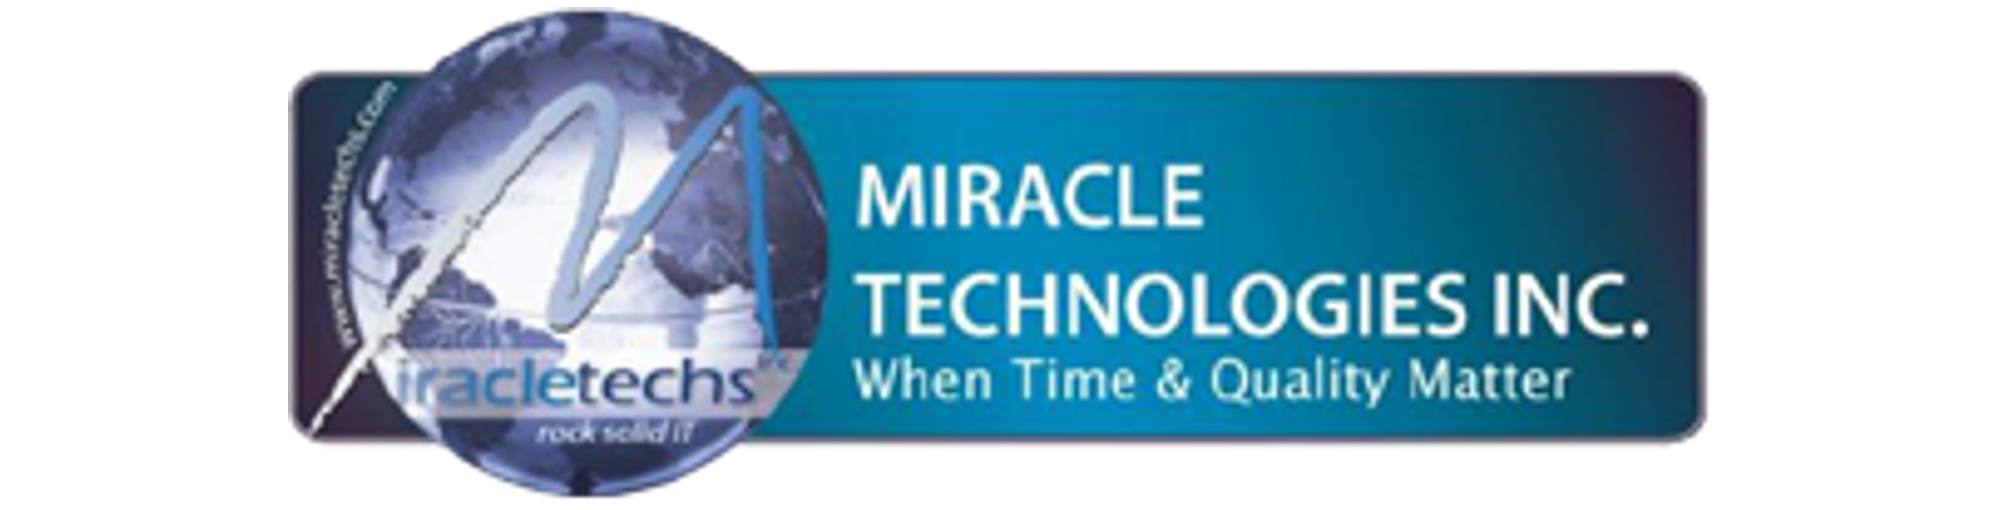 Miracle Technologies Inc